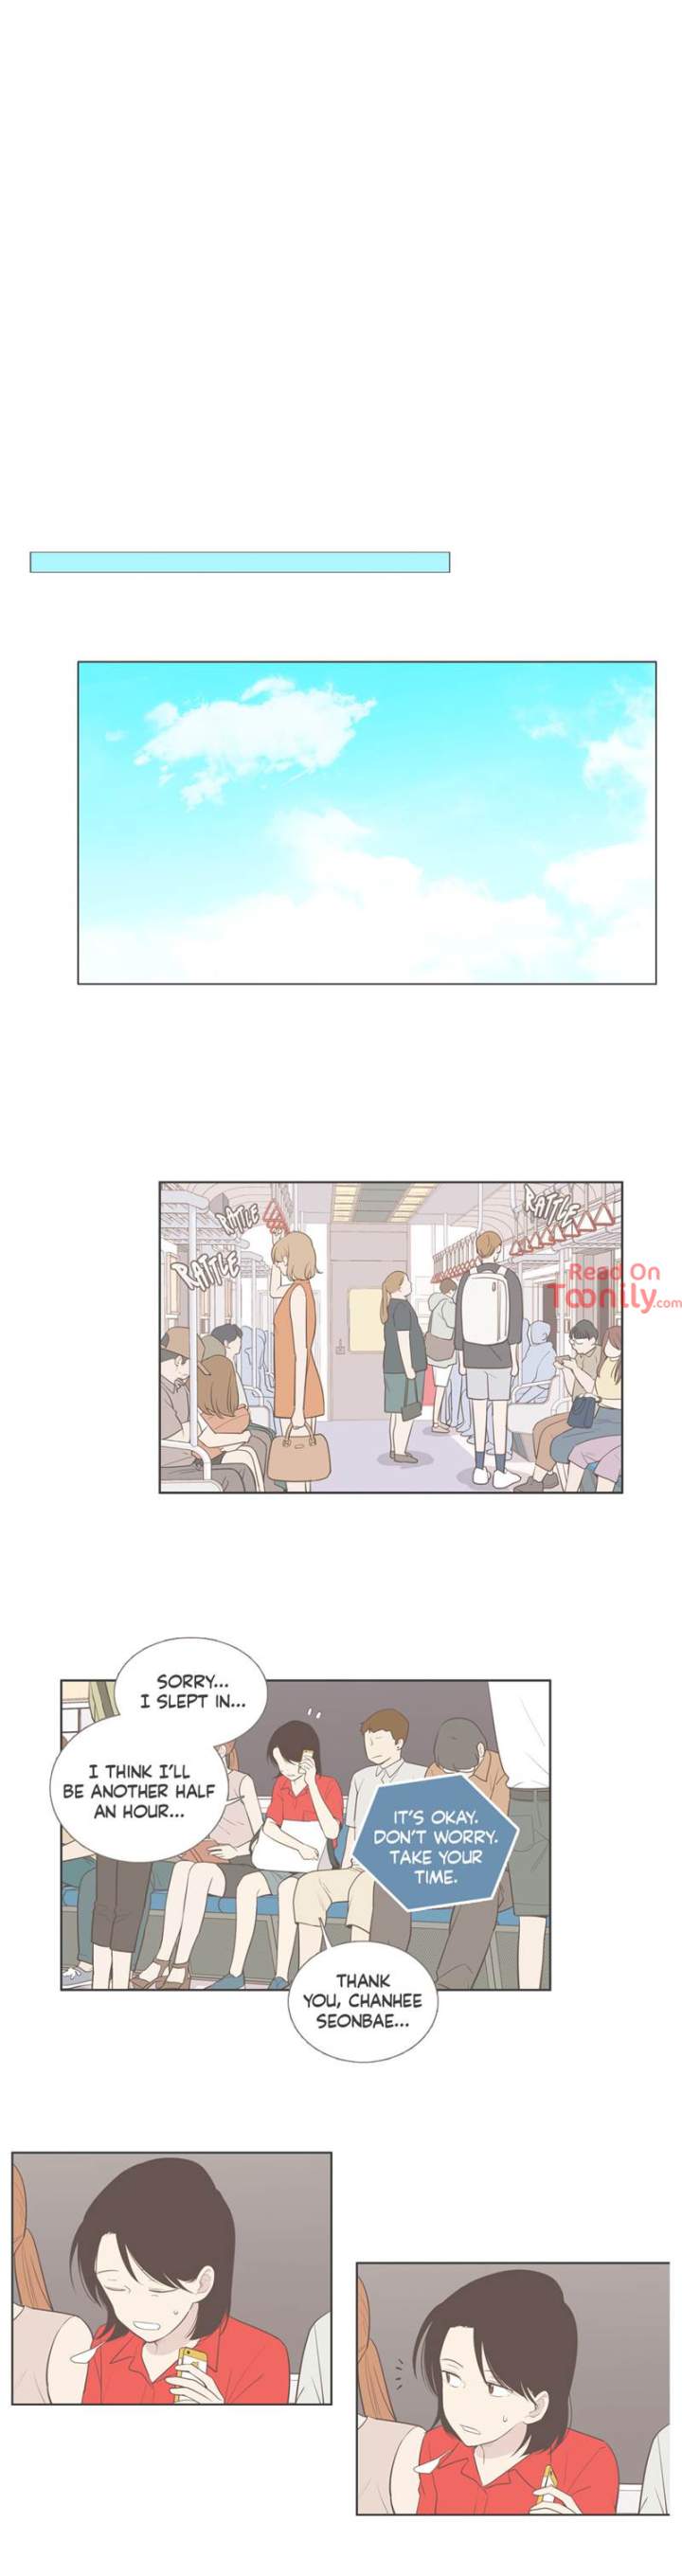 Something About Us - Chapter 90 Page 6